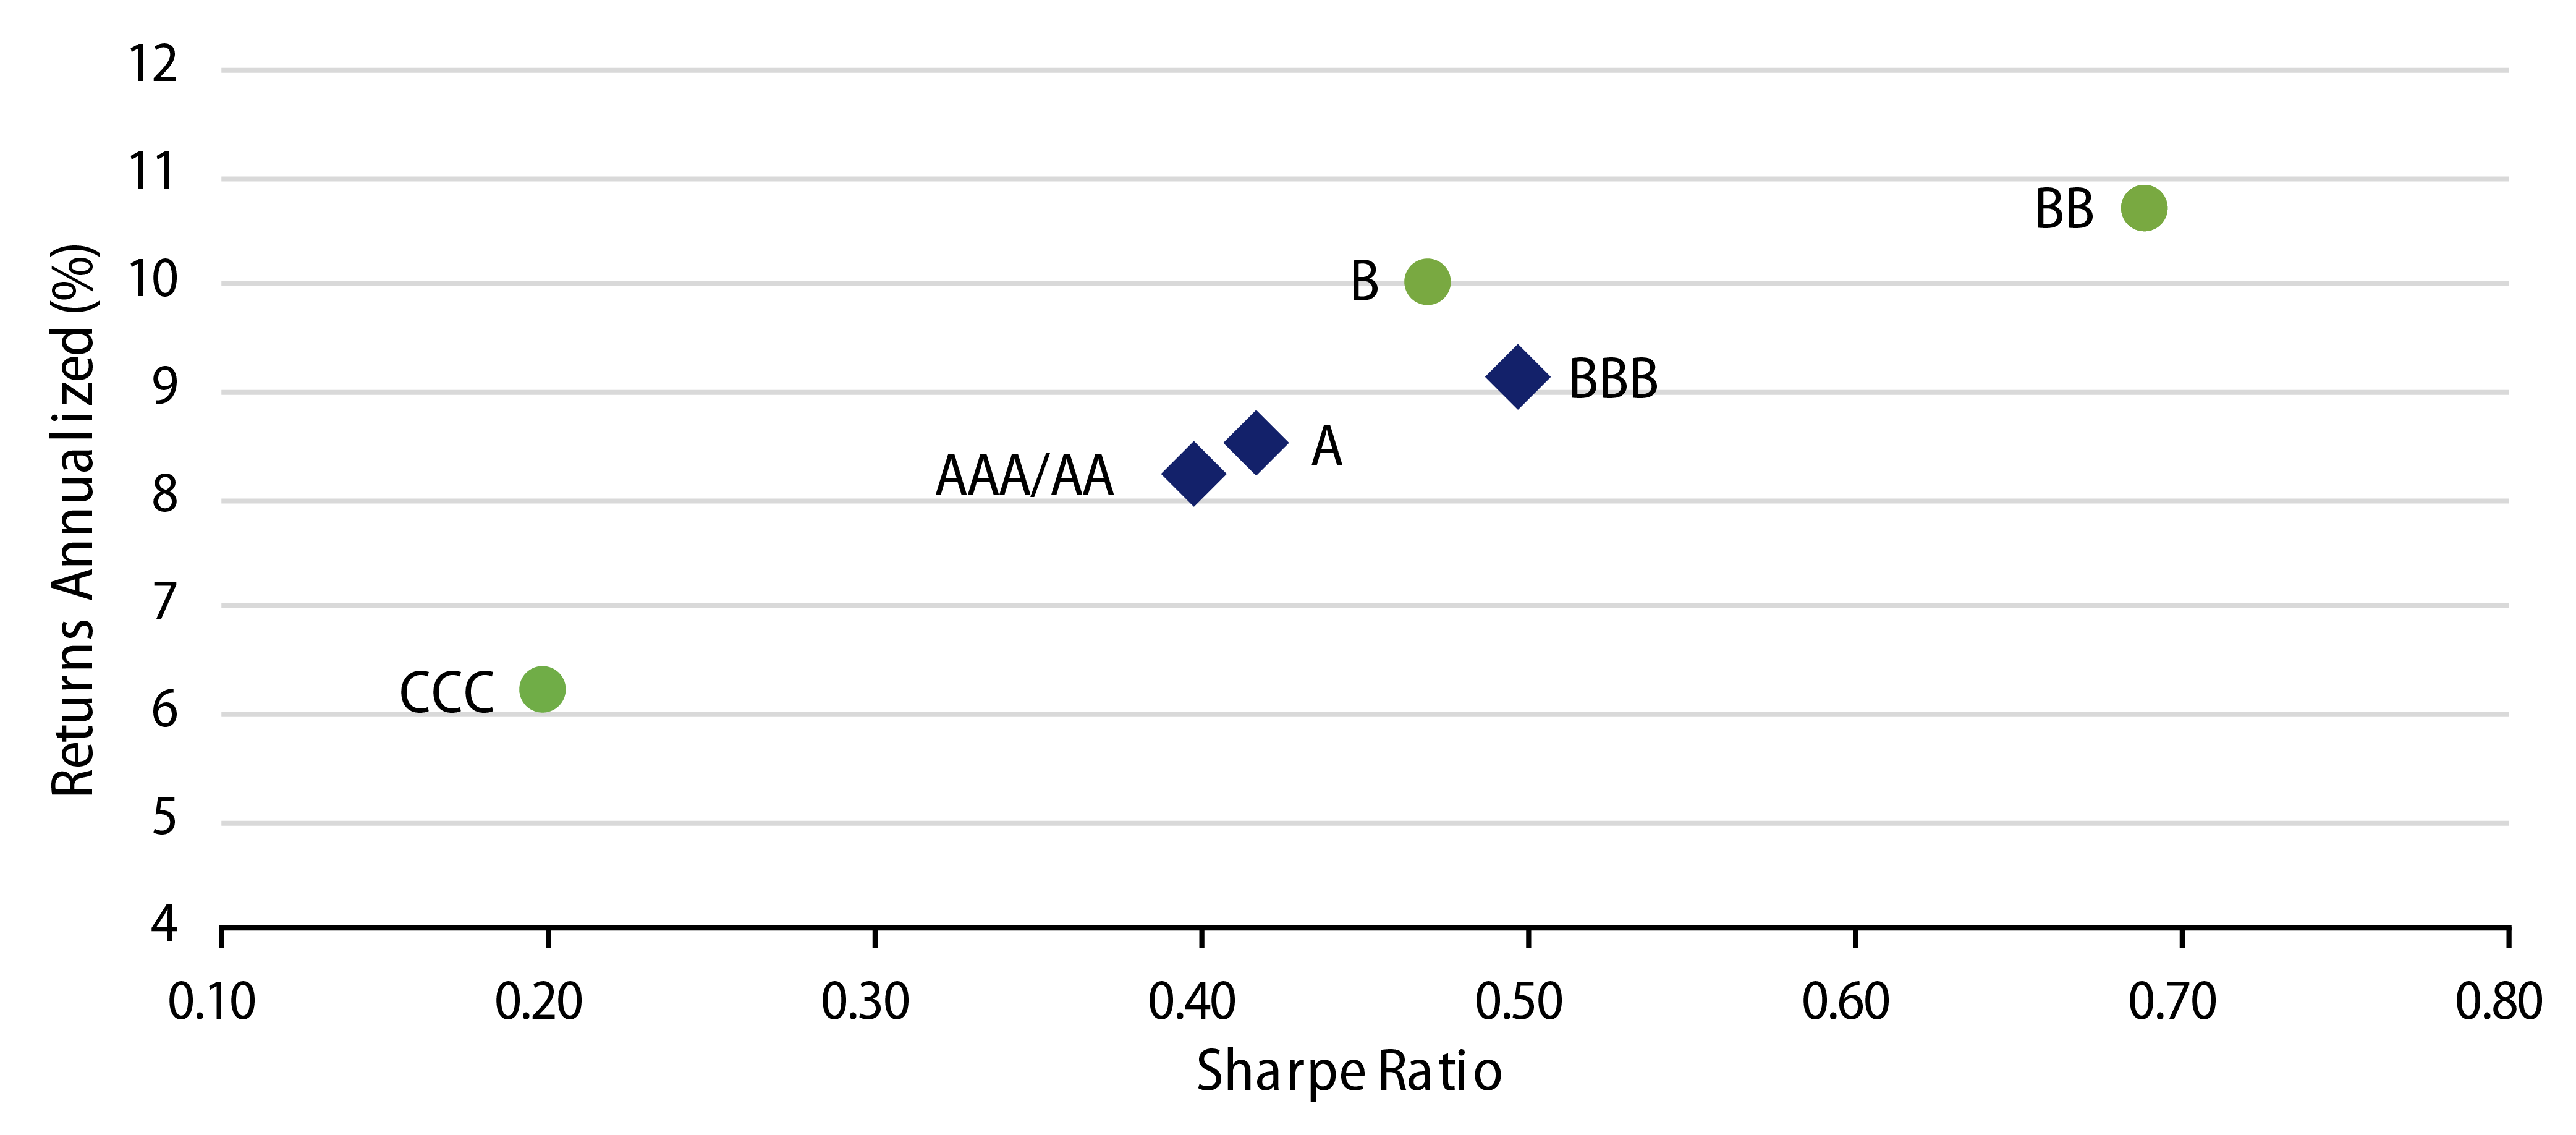 Explore Historically, BB Rated Credit Performed Better on an Absolute and Risk-Adjusted Basis